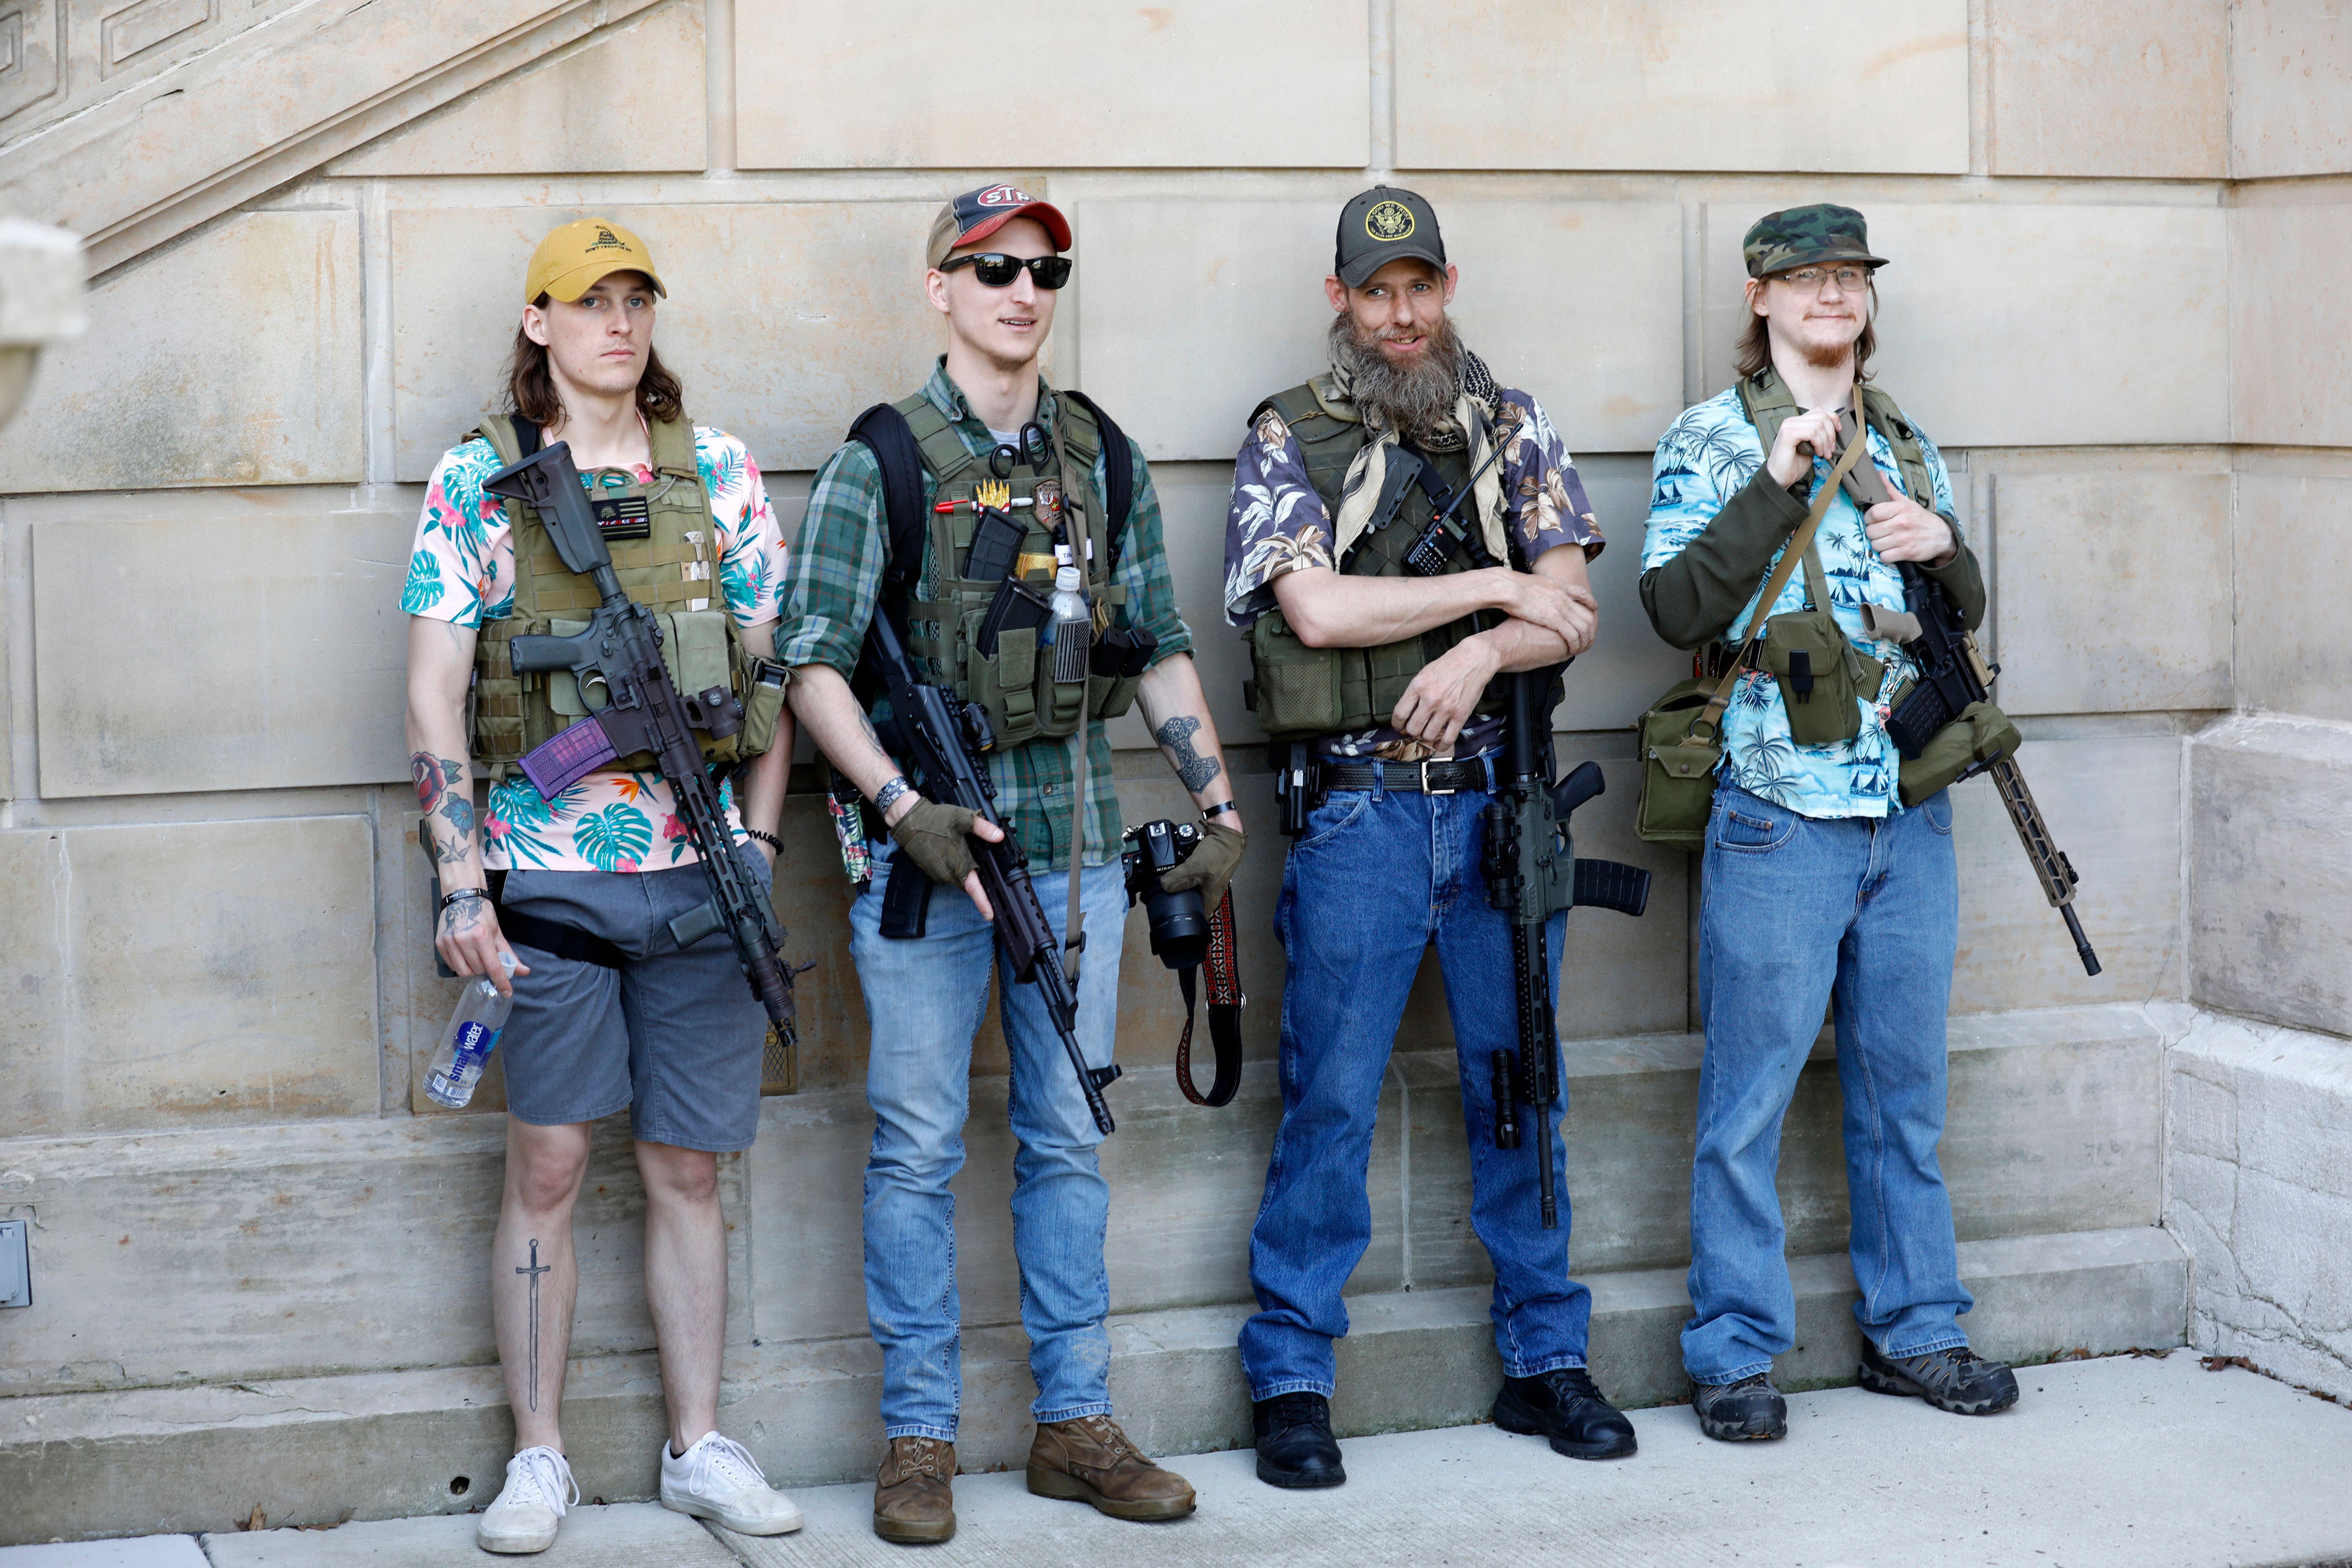 Four Boogaloo Bois carrying rifles and wearing Hawaiian shirts, lined up against a wall.